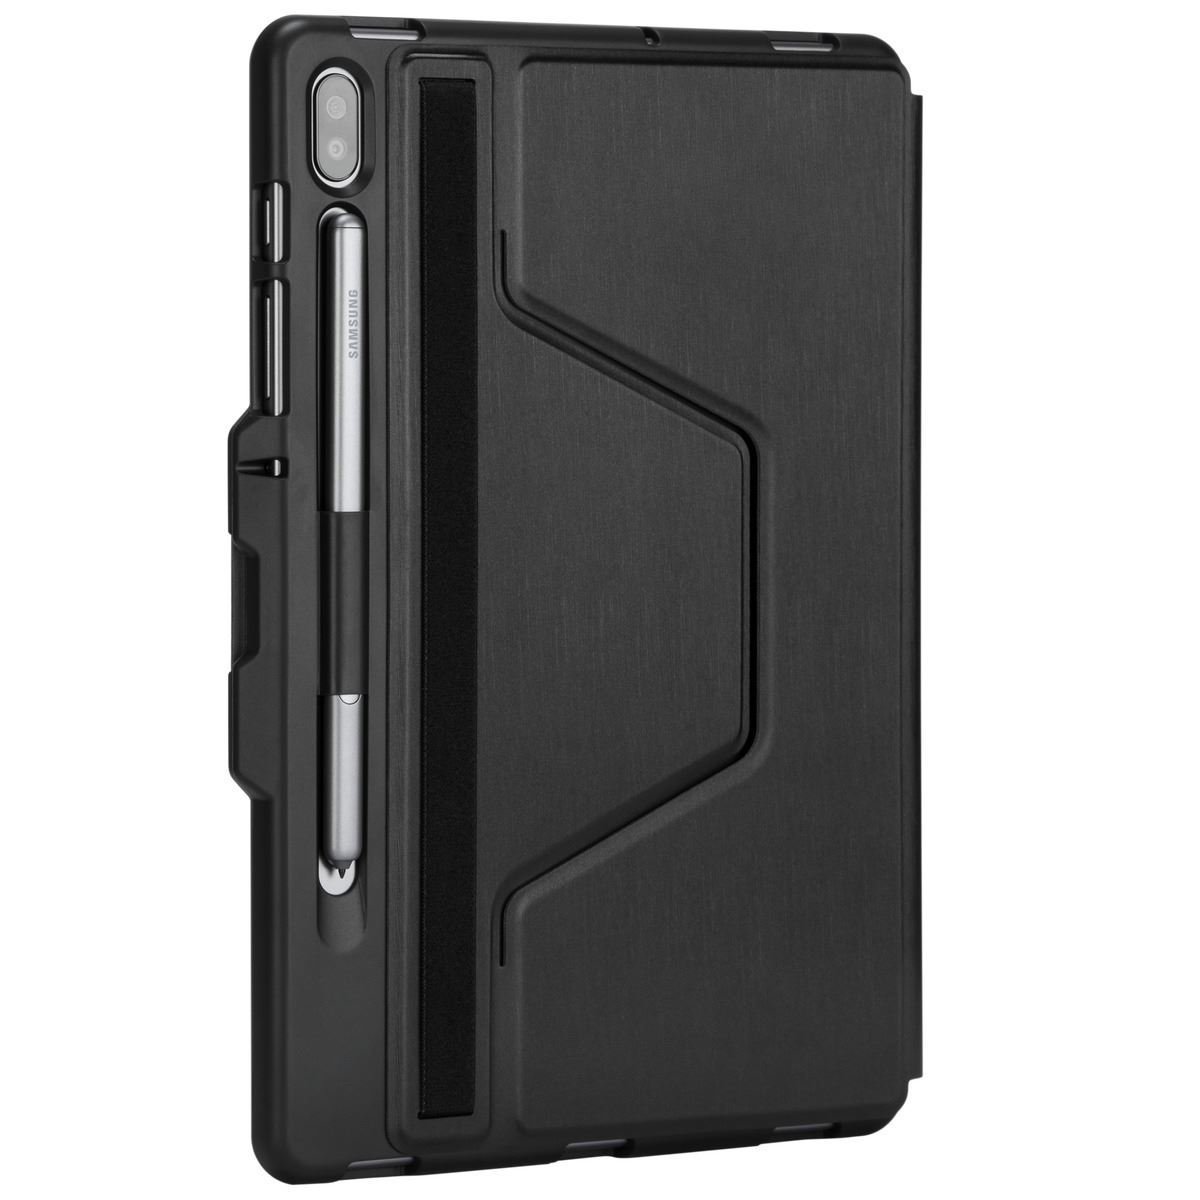 https://www.targus.com/content/images/thumbs/0055235_click-in-case-for-samsung-galaxy-tab-s6-2019-black.jpeg